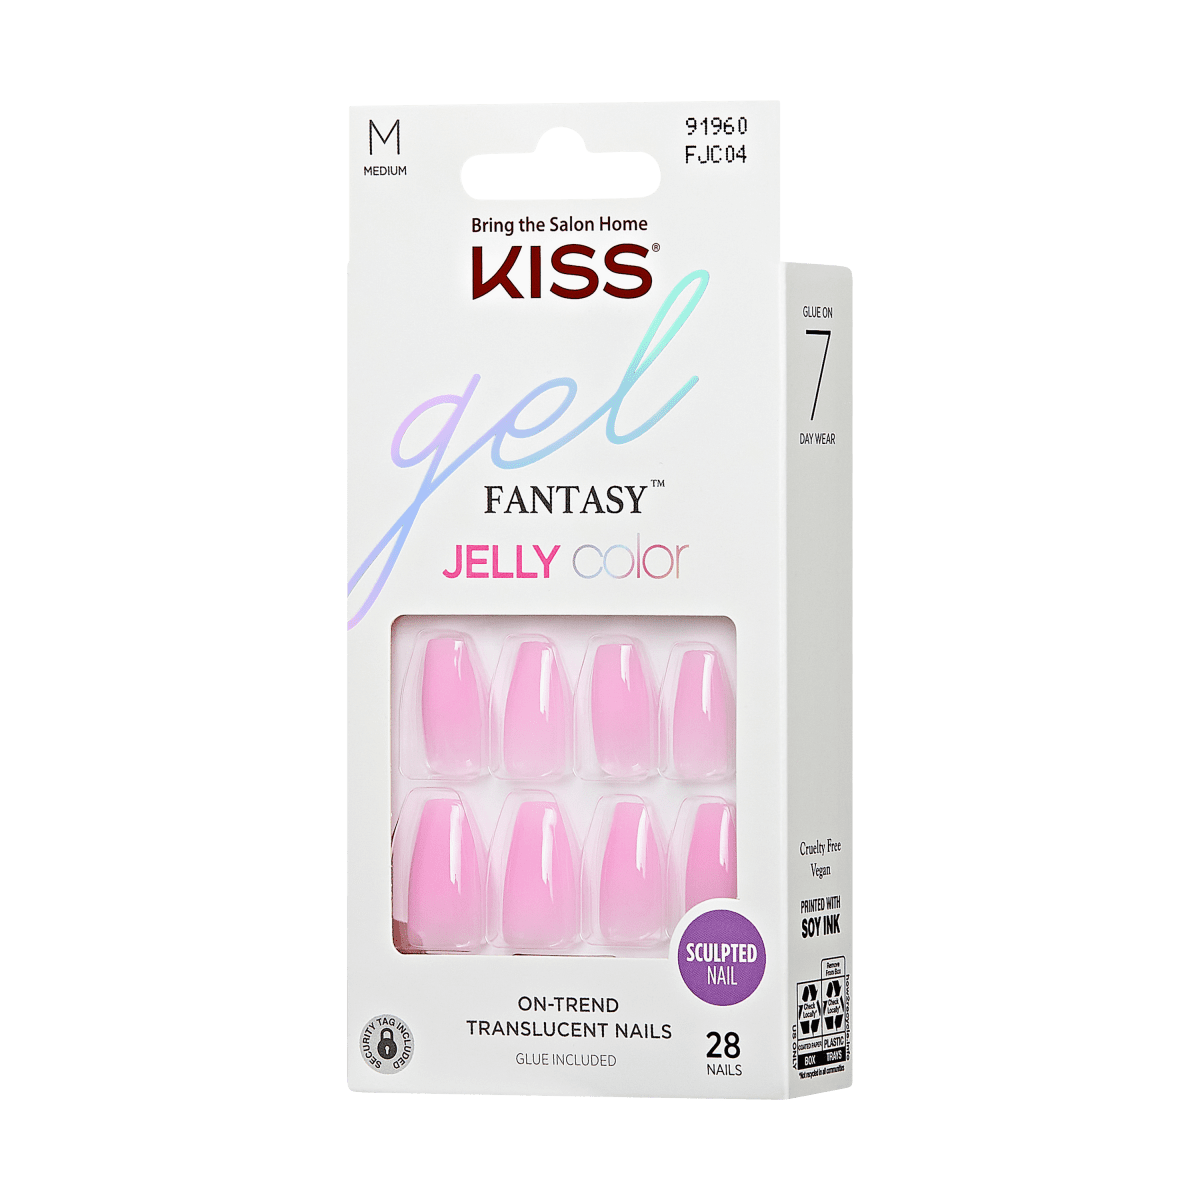 KISS Gel Fantasy, Press-On Nails, Jelly Case, Pink, Med Coffin, 28ct